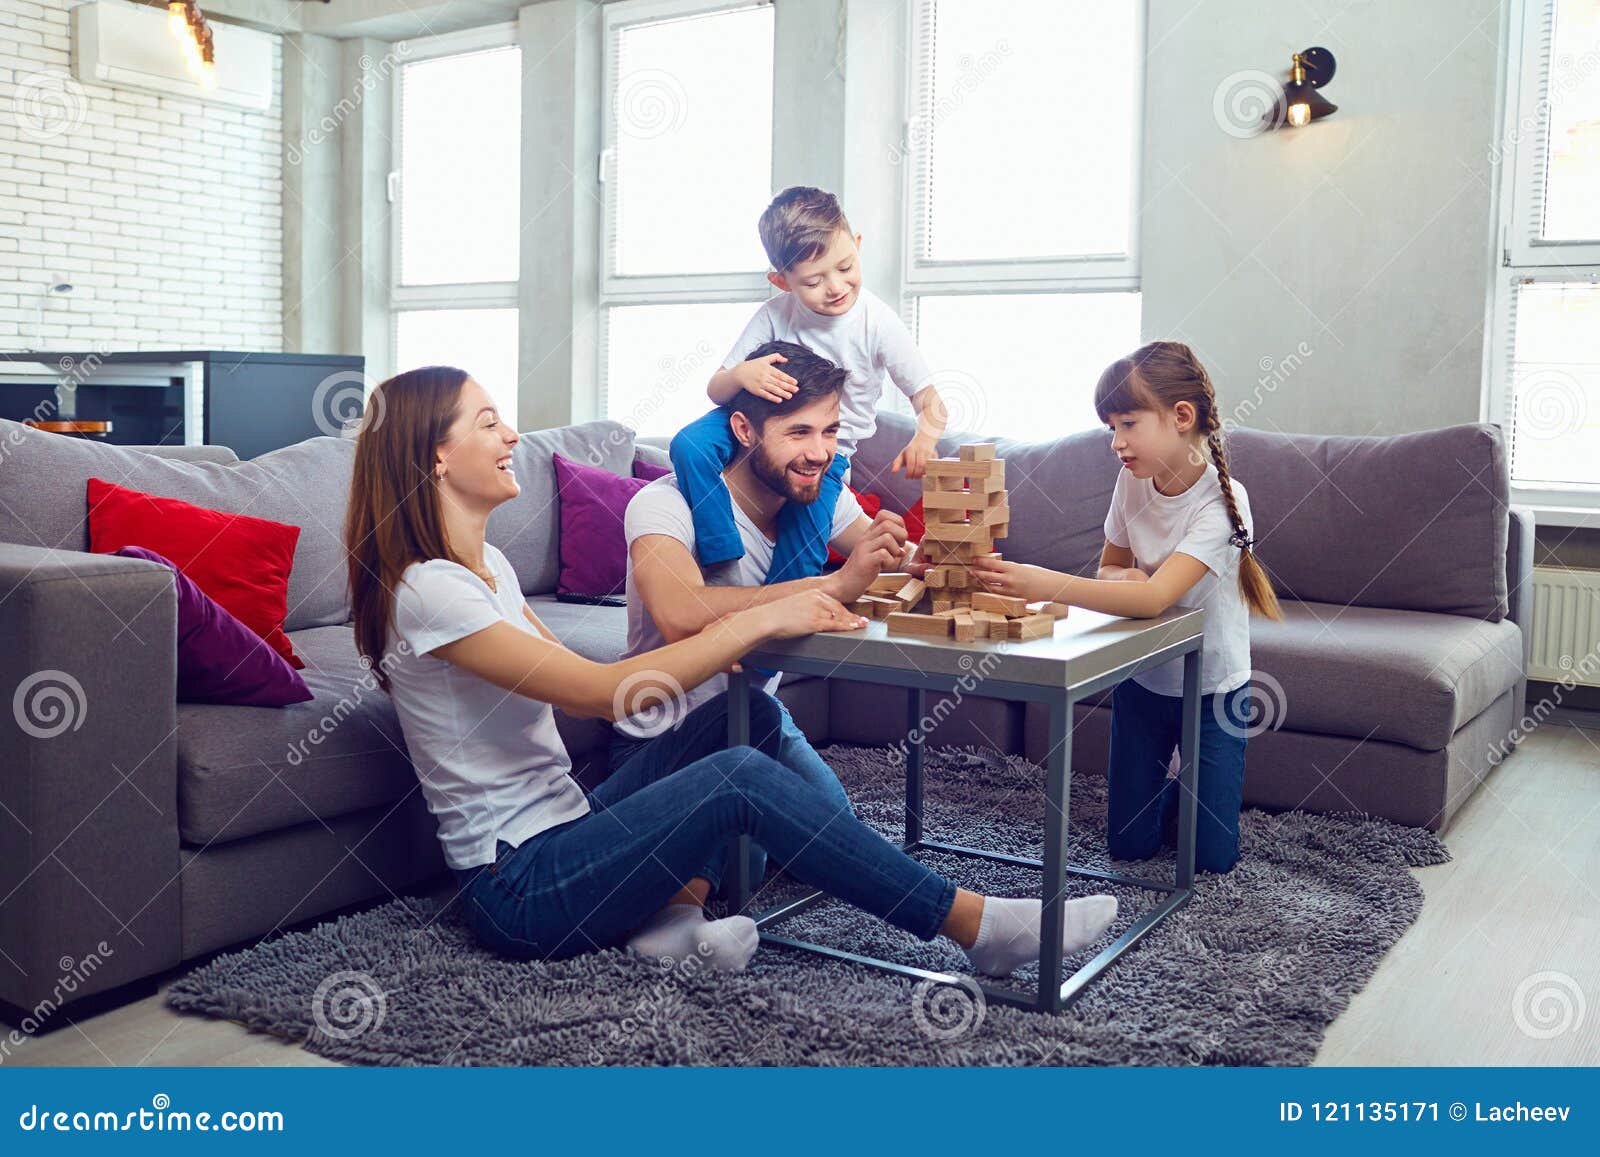 happy family playing board games at home.